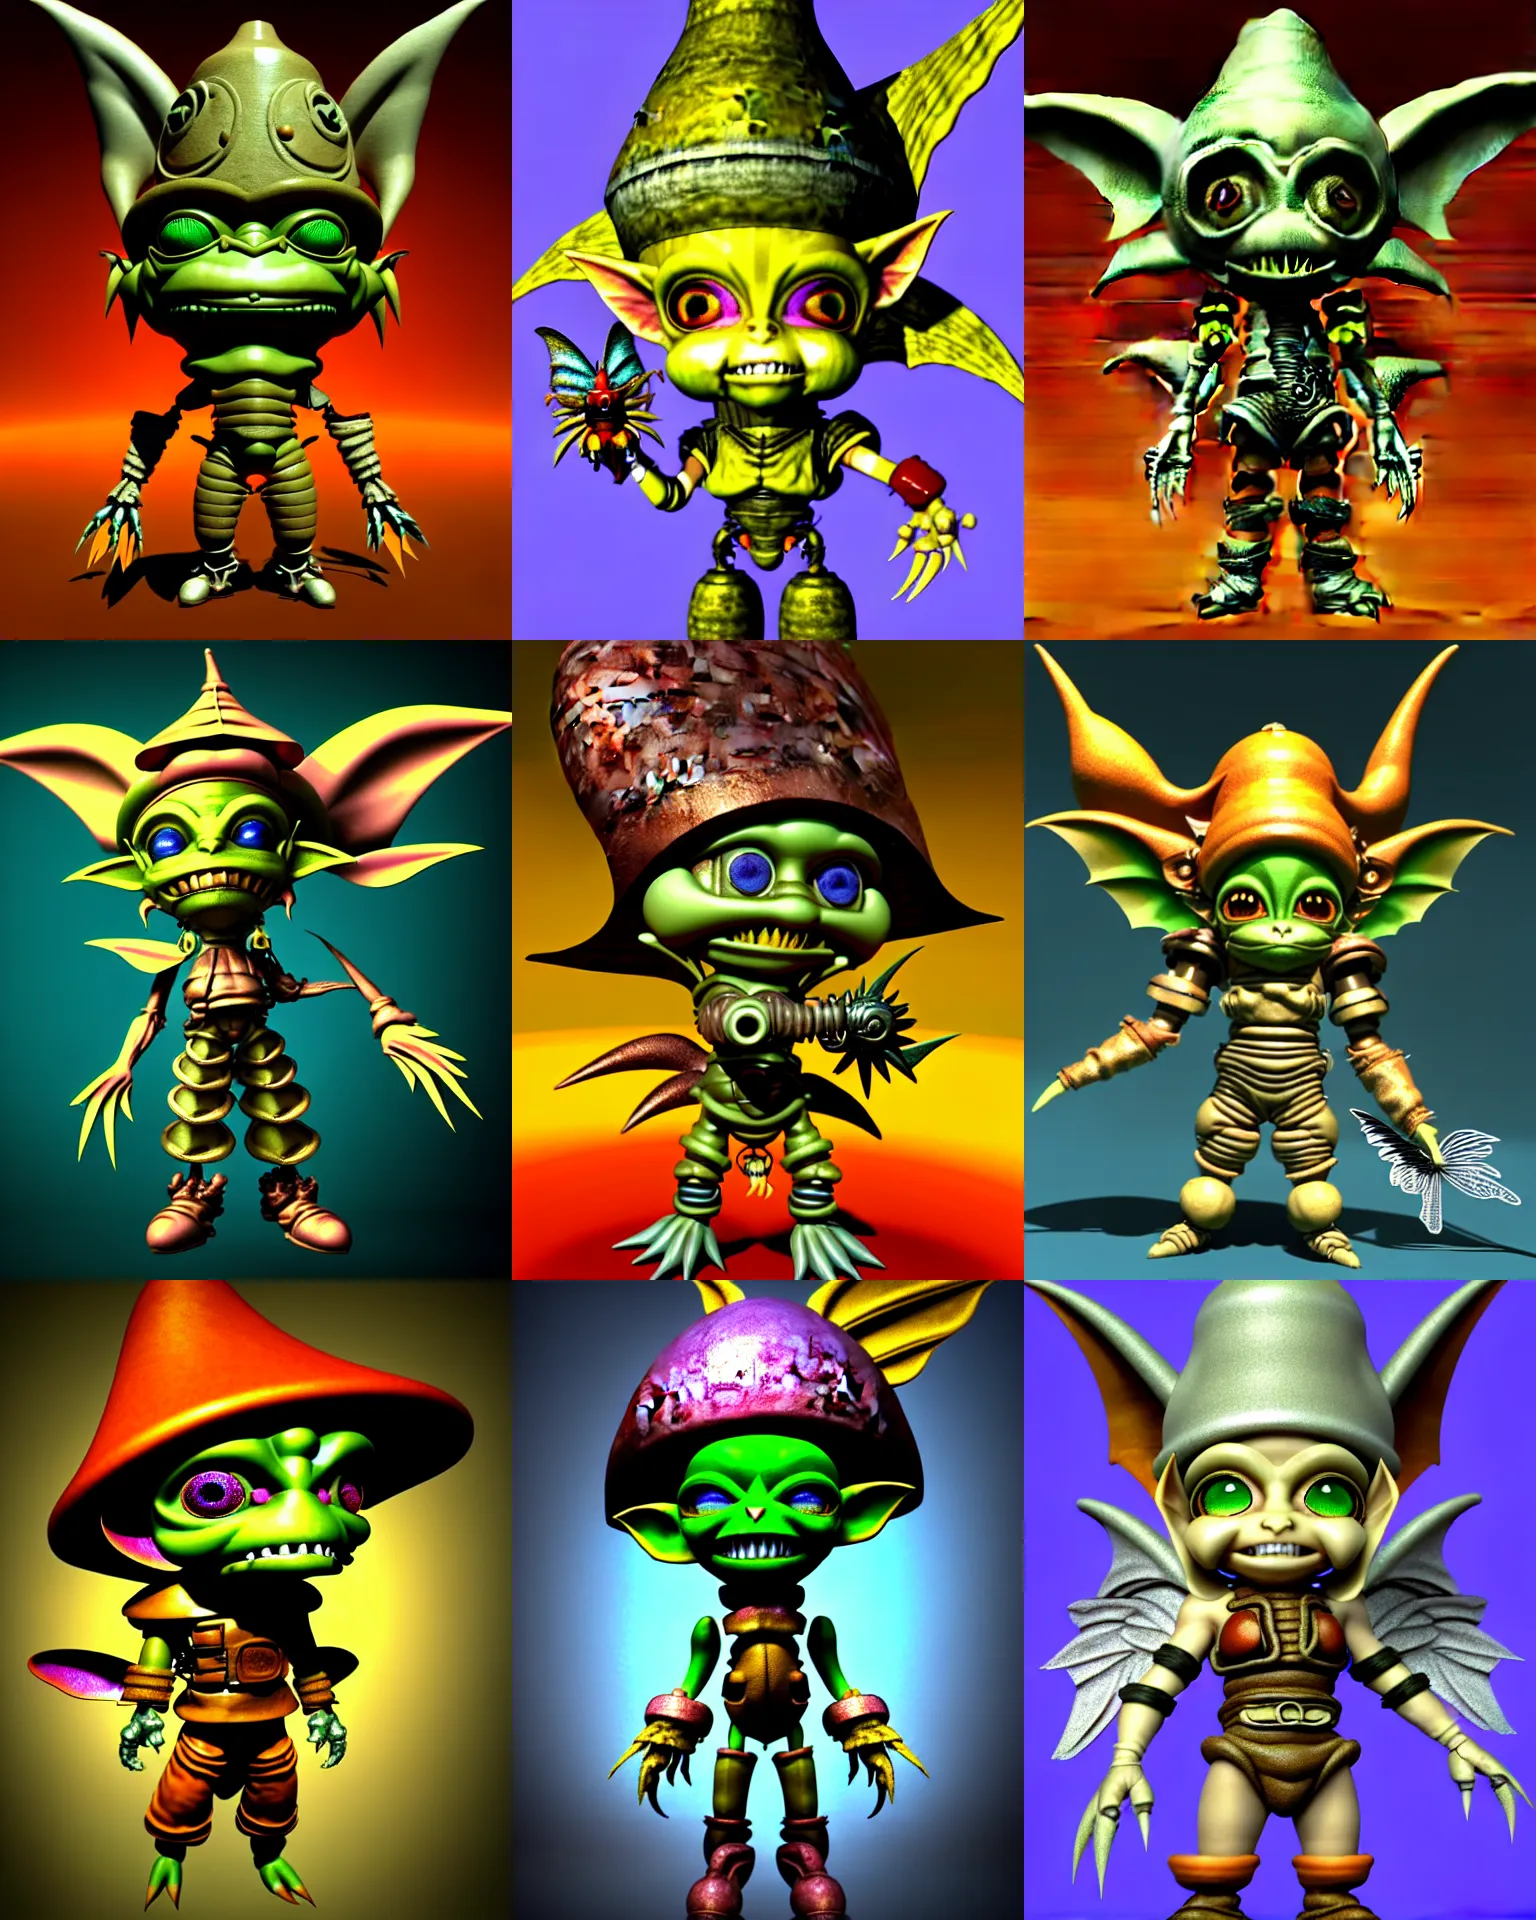 Prompt: vintage cgi 3 dimensional render of chibi cyborg goblin in the style of micha klein final fantasy ix by ichiro tanida wearing a big bell hat and wearing angel wings against a psychedelic swirly background with 3 d butterflies and 3 d flowers n the style of 1 9 9 0's cgi renders 3 d rendered by micha klein lightwave